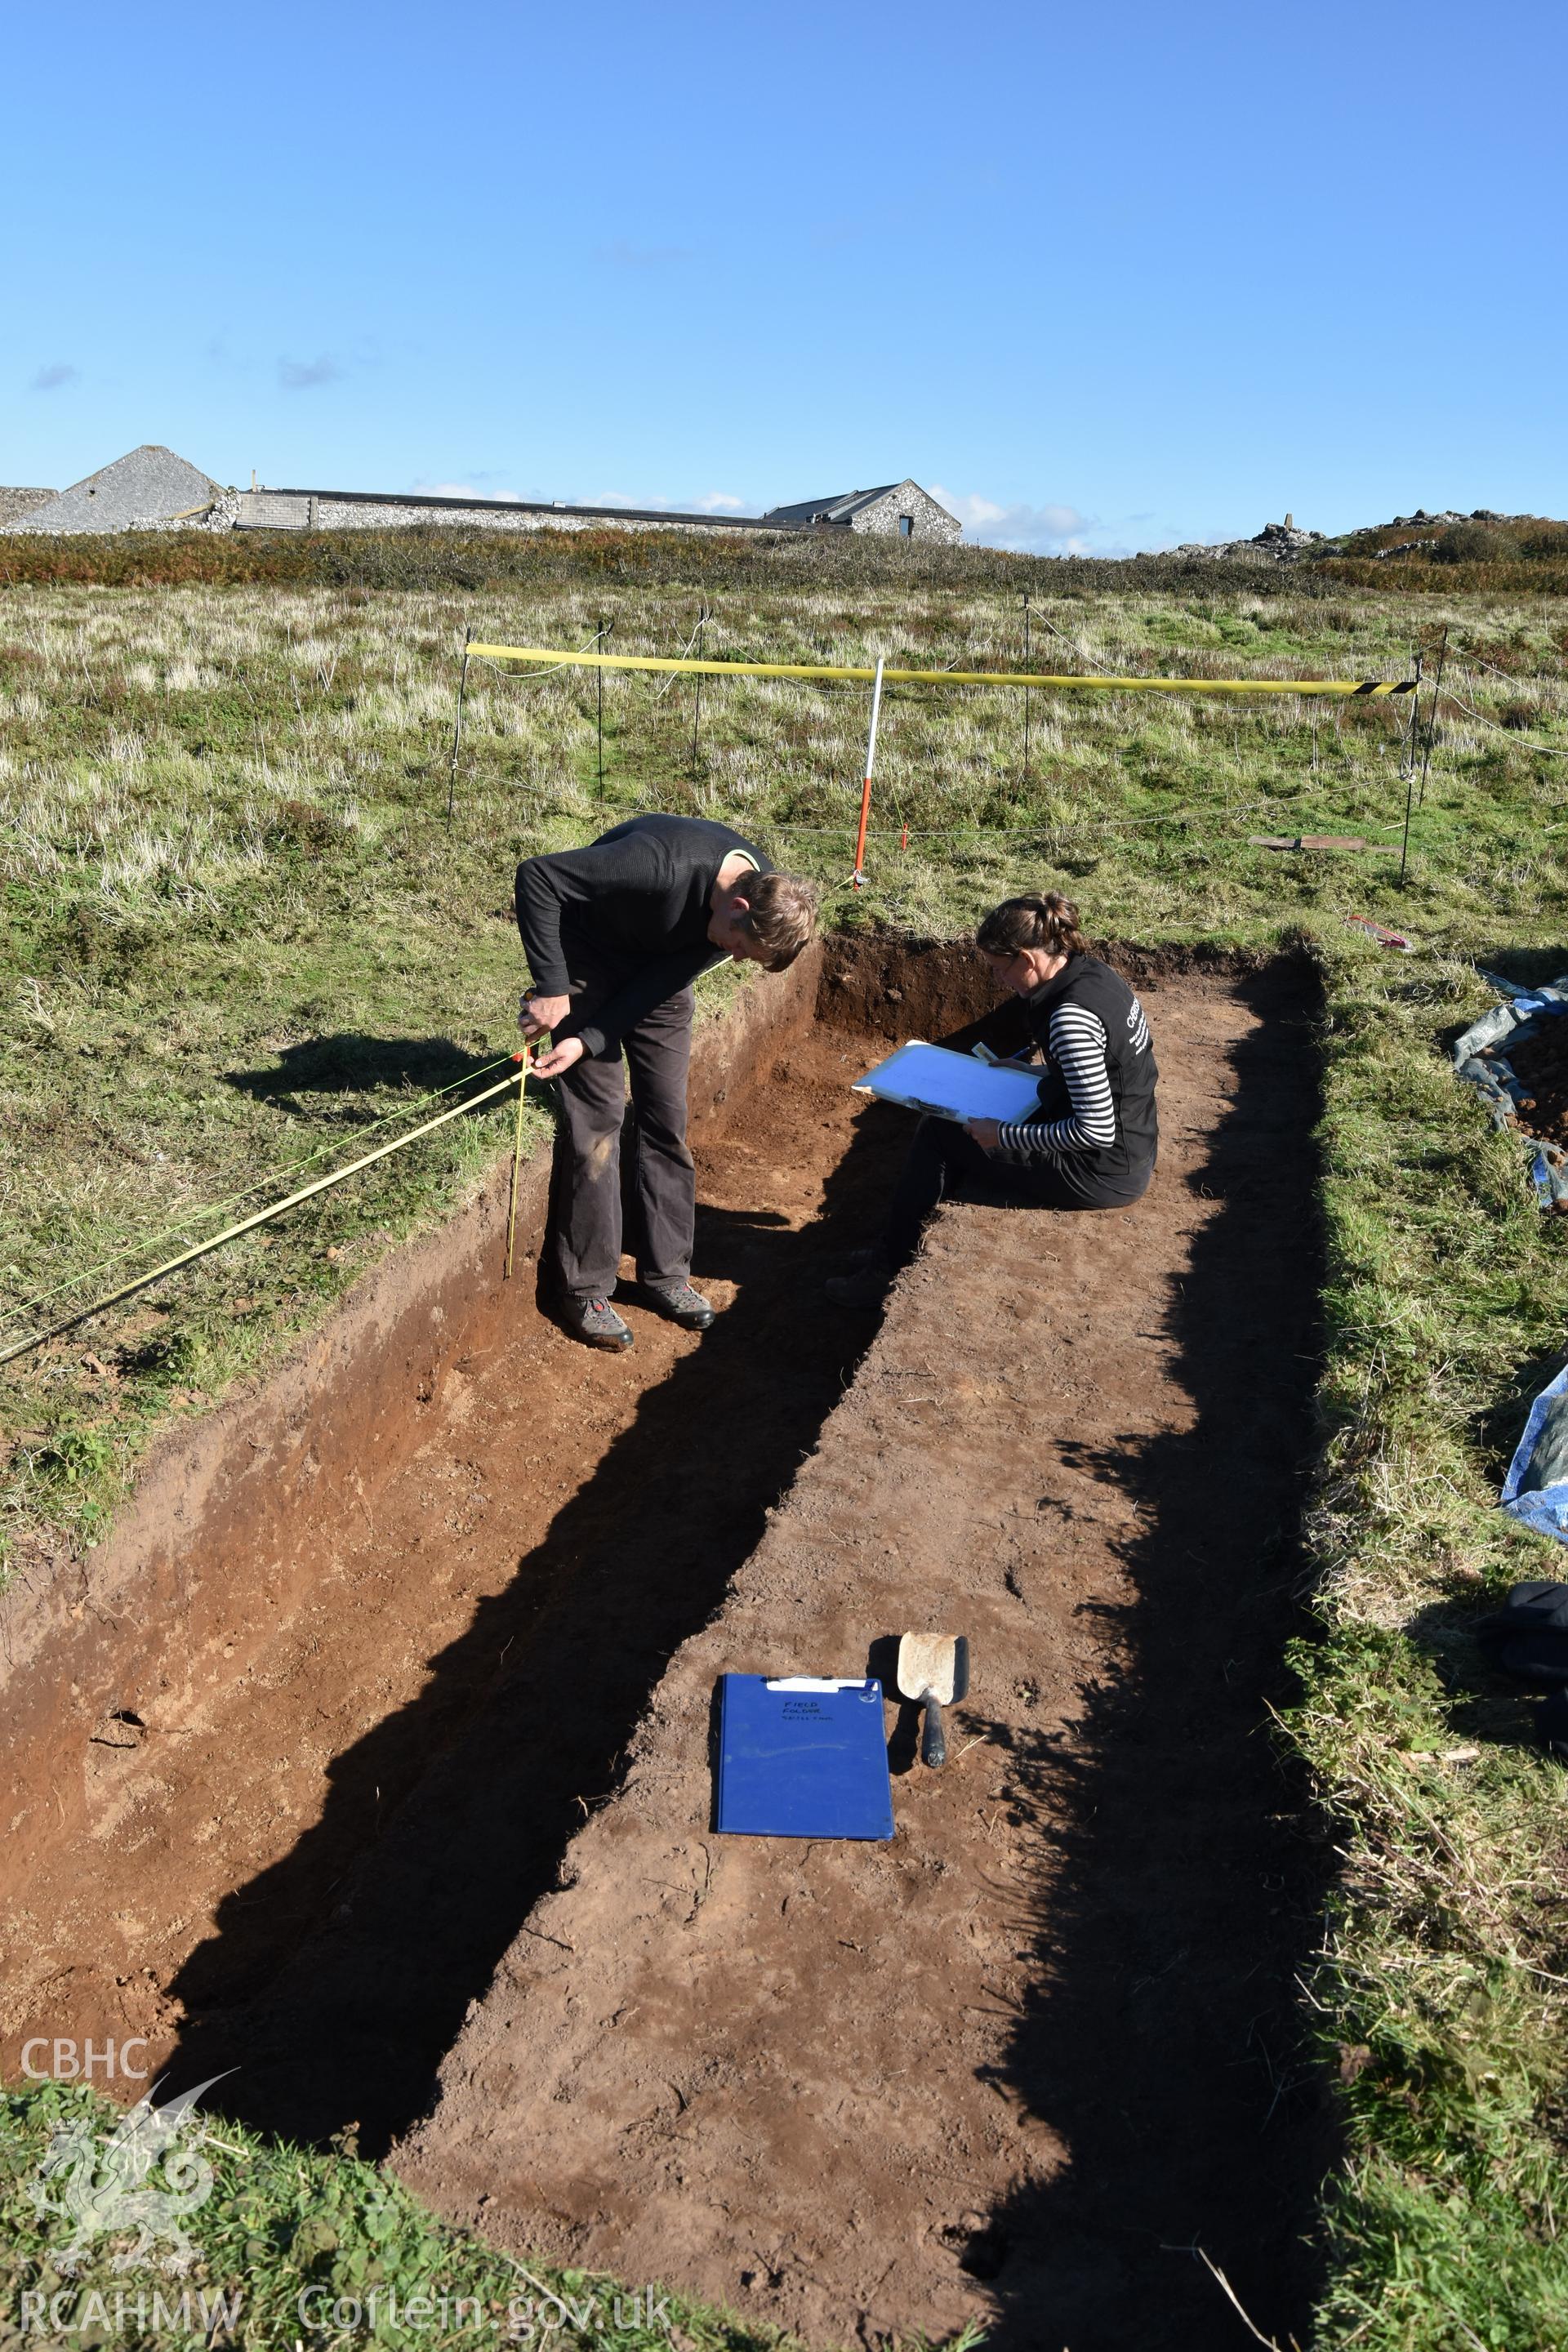 Investigator's photography showing the evaluation excavation of a geophysical anomaly in Well Meadow, Skomer Island, between 25-27th Sept 2018 as part of the Skomer Island Project. Section drawing in progress with L. Barker and B. Johnston.